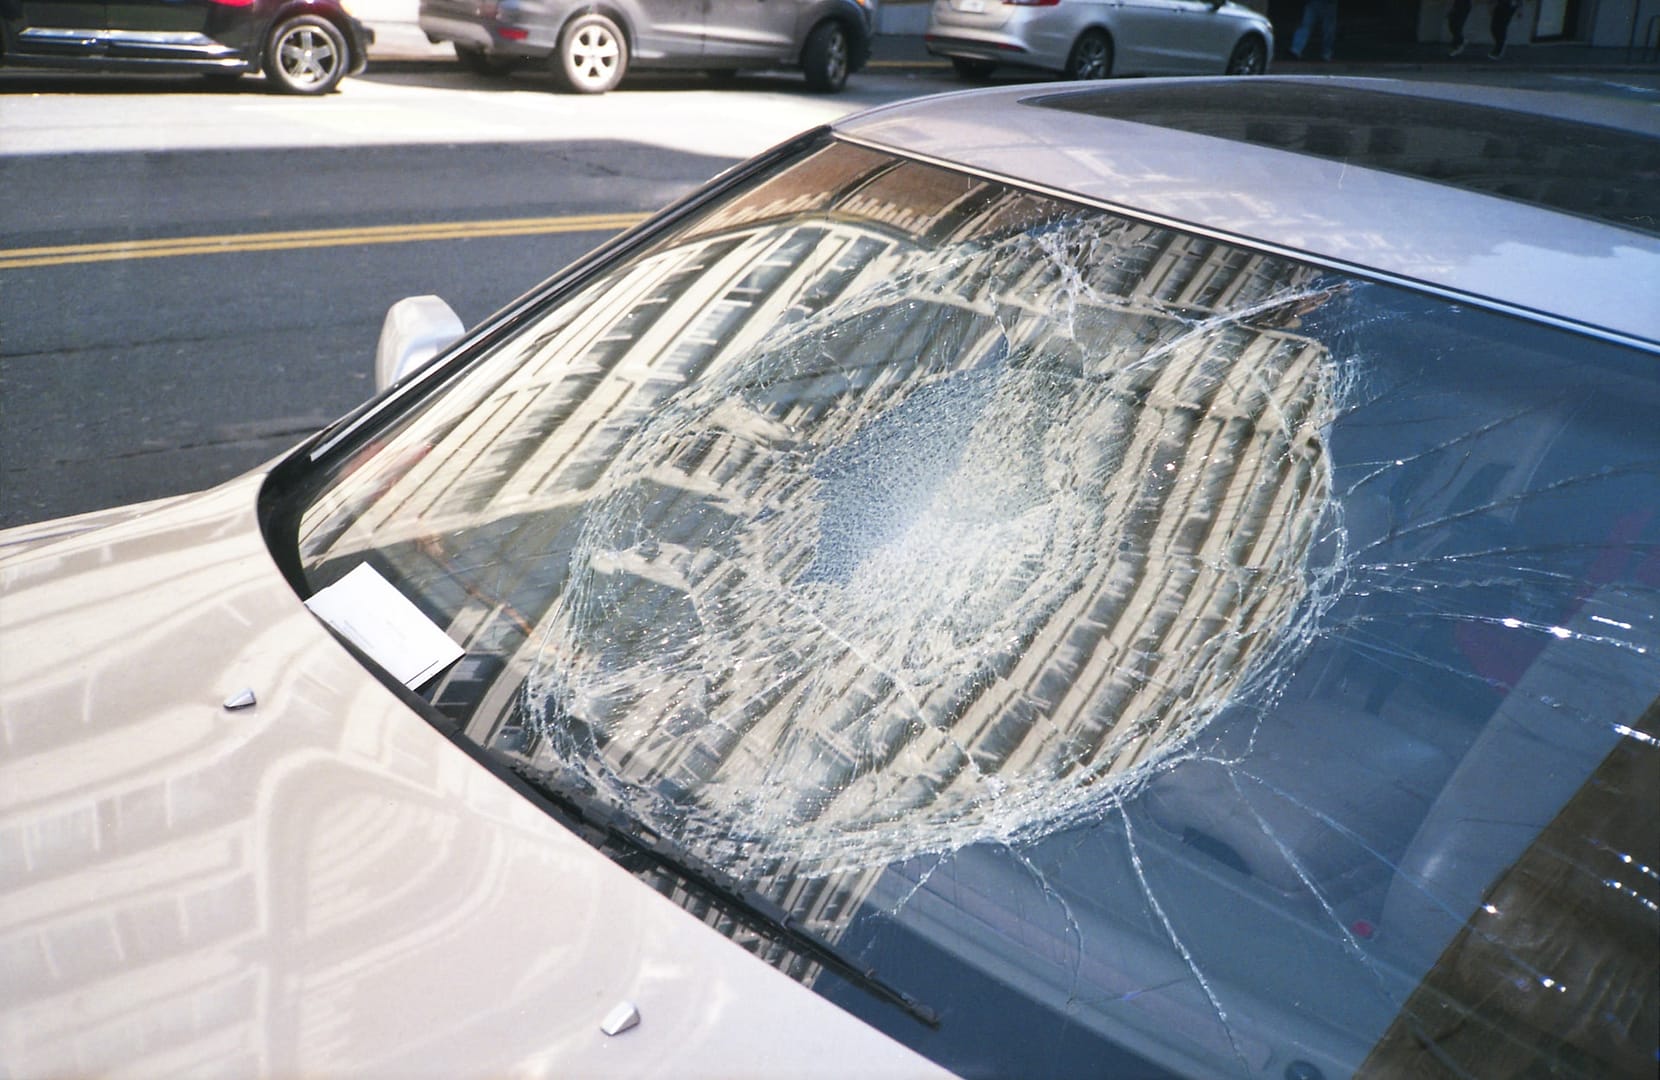 A smashed windscreen on a car